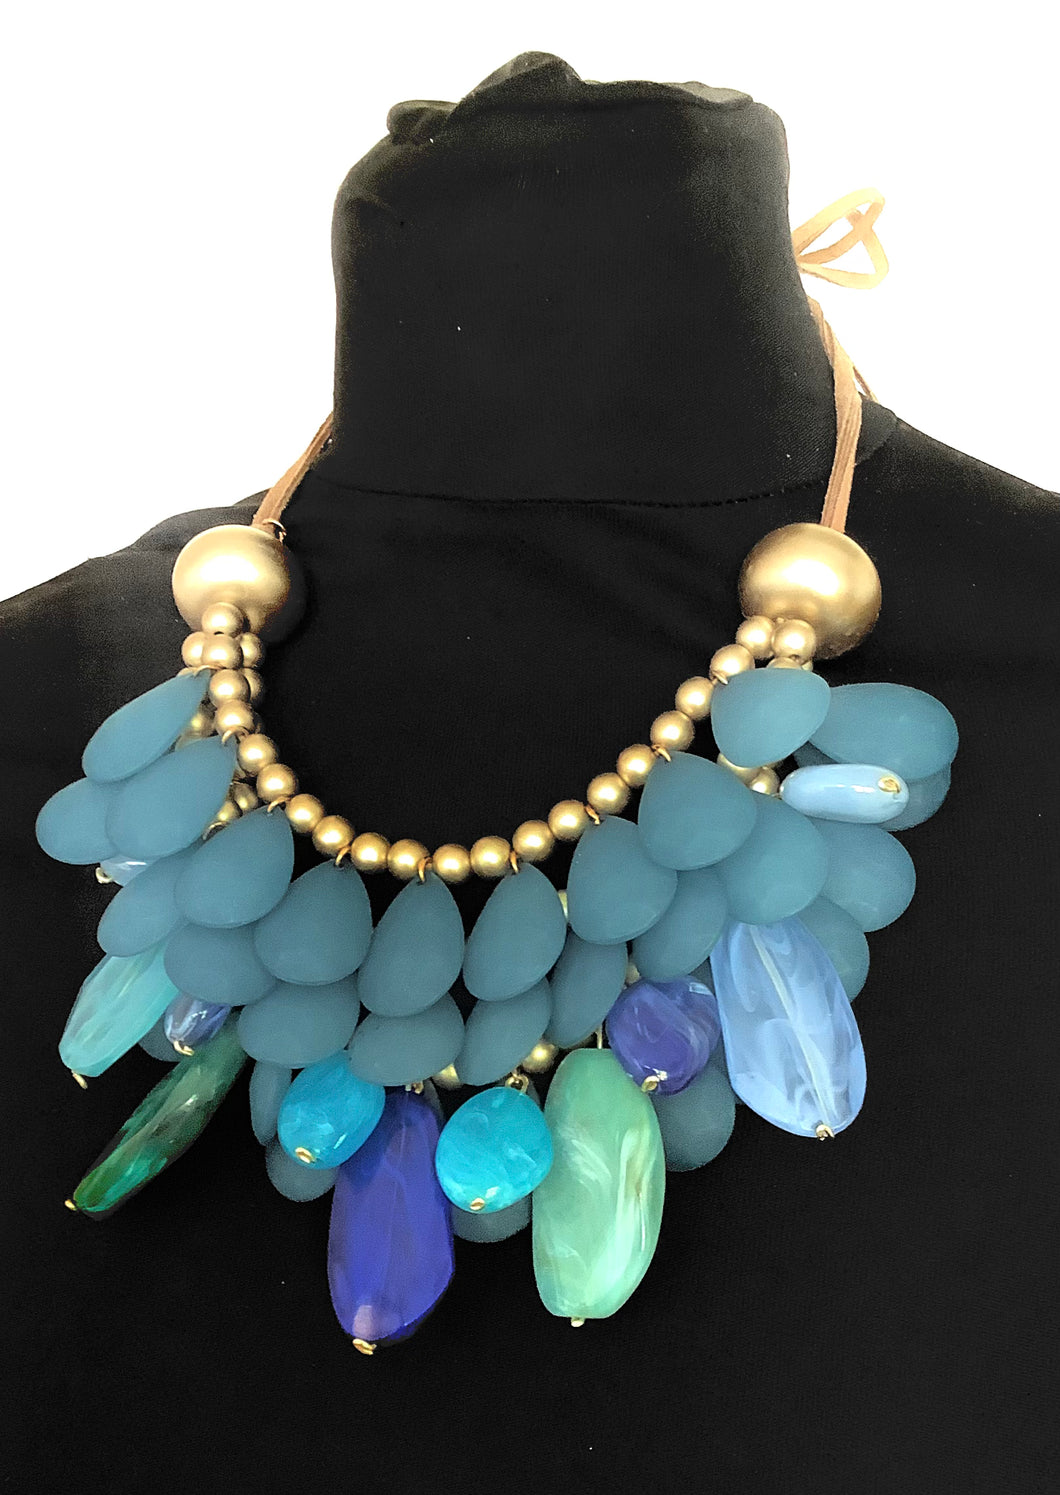 Chunky Blue Layered Bead Necklace